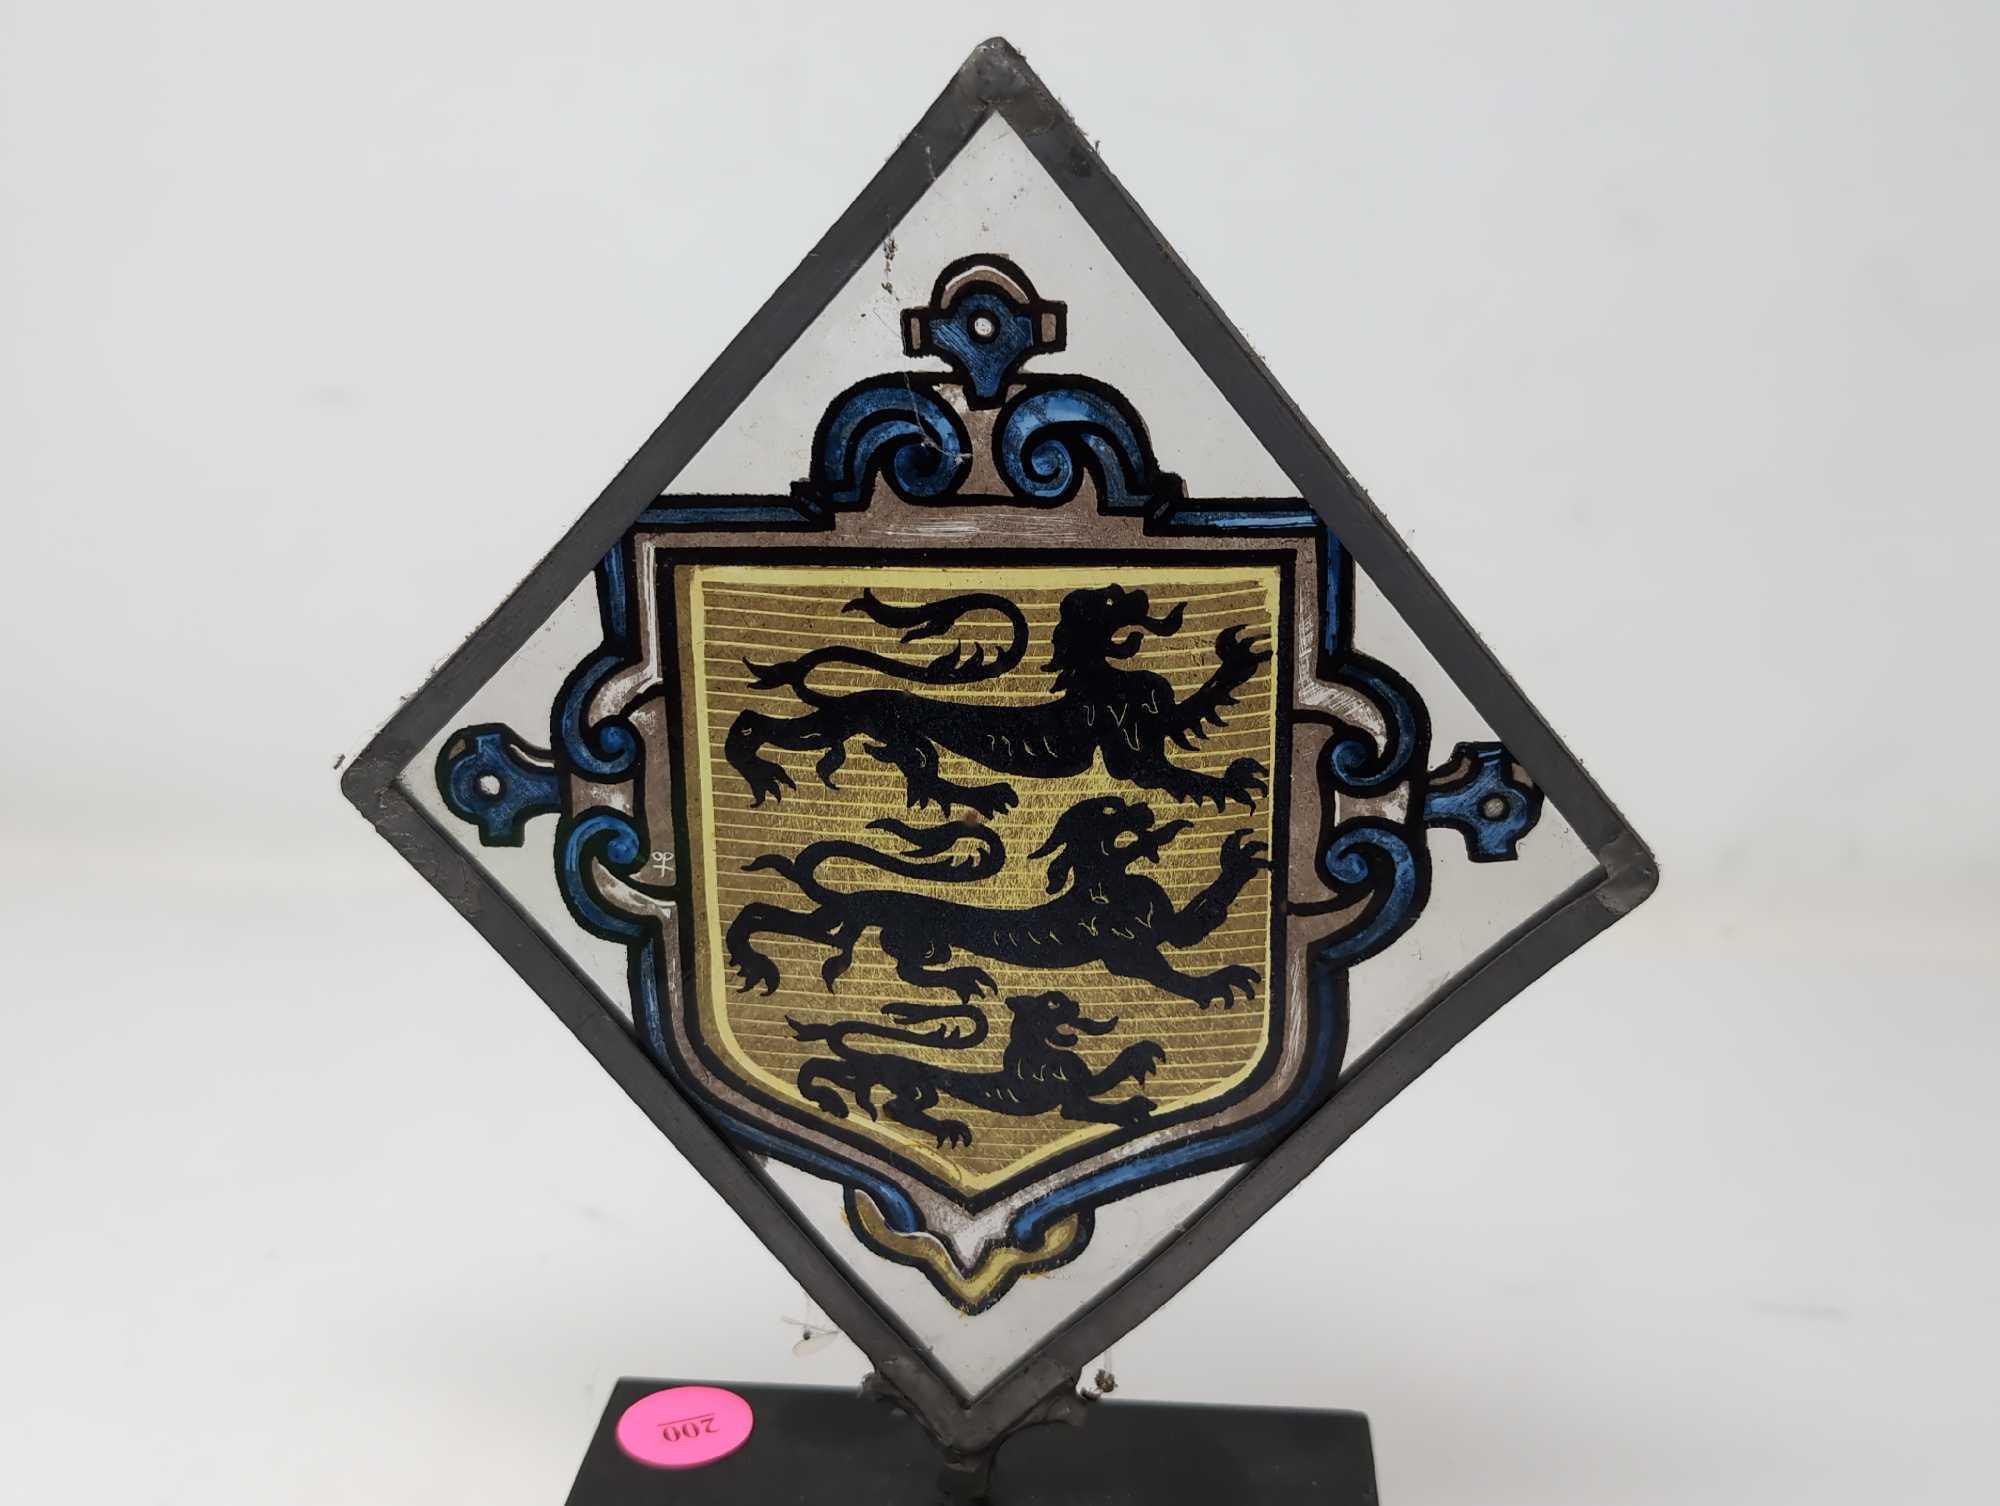 (LR) VINTAGE TRIANGULAR PAINTING ON GLASS DEPICTING A THREE LION CREST. THE GLASS IS FRAMED IN A